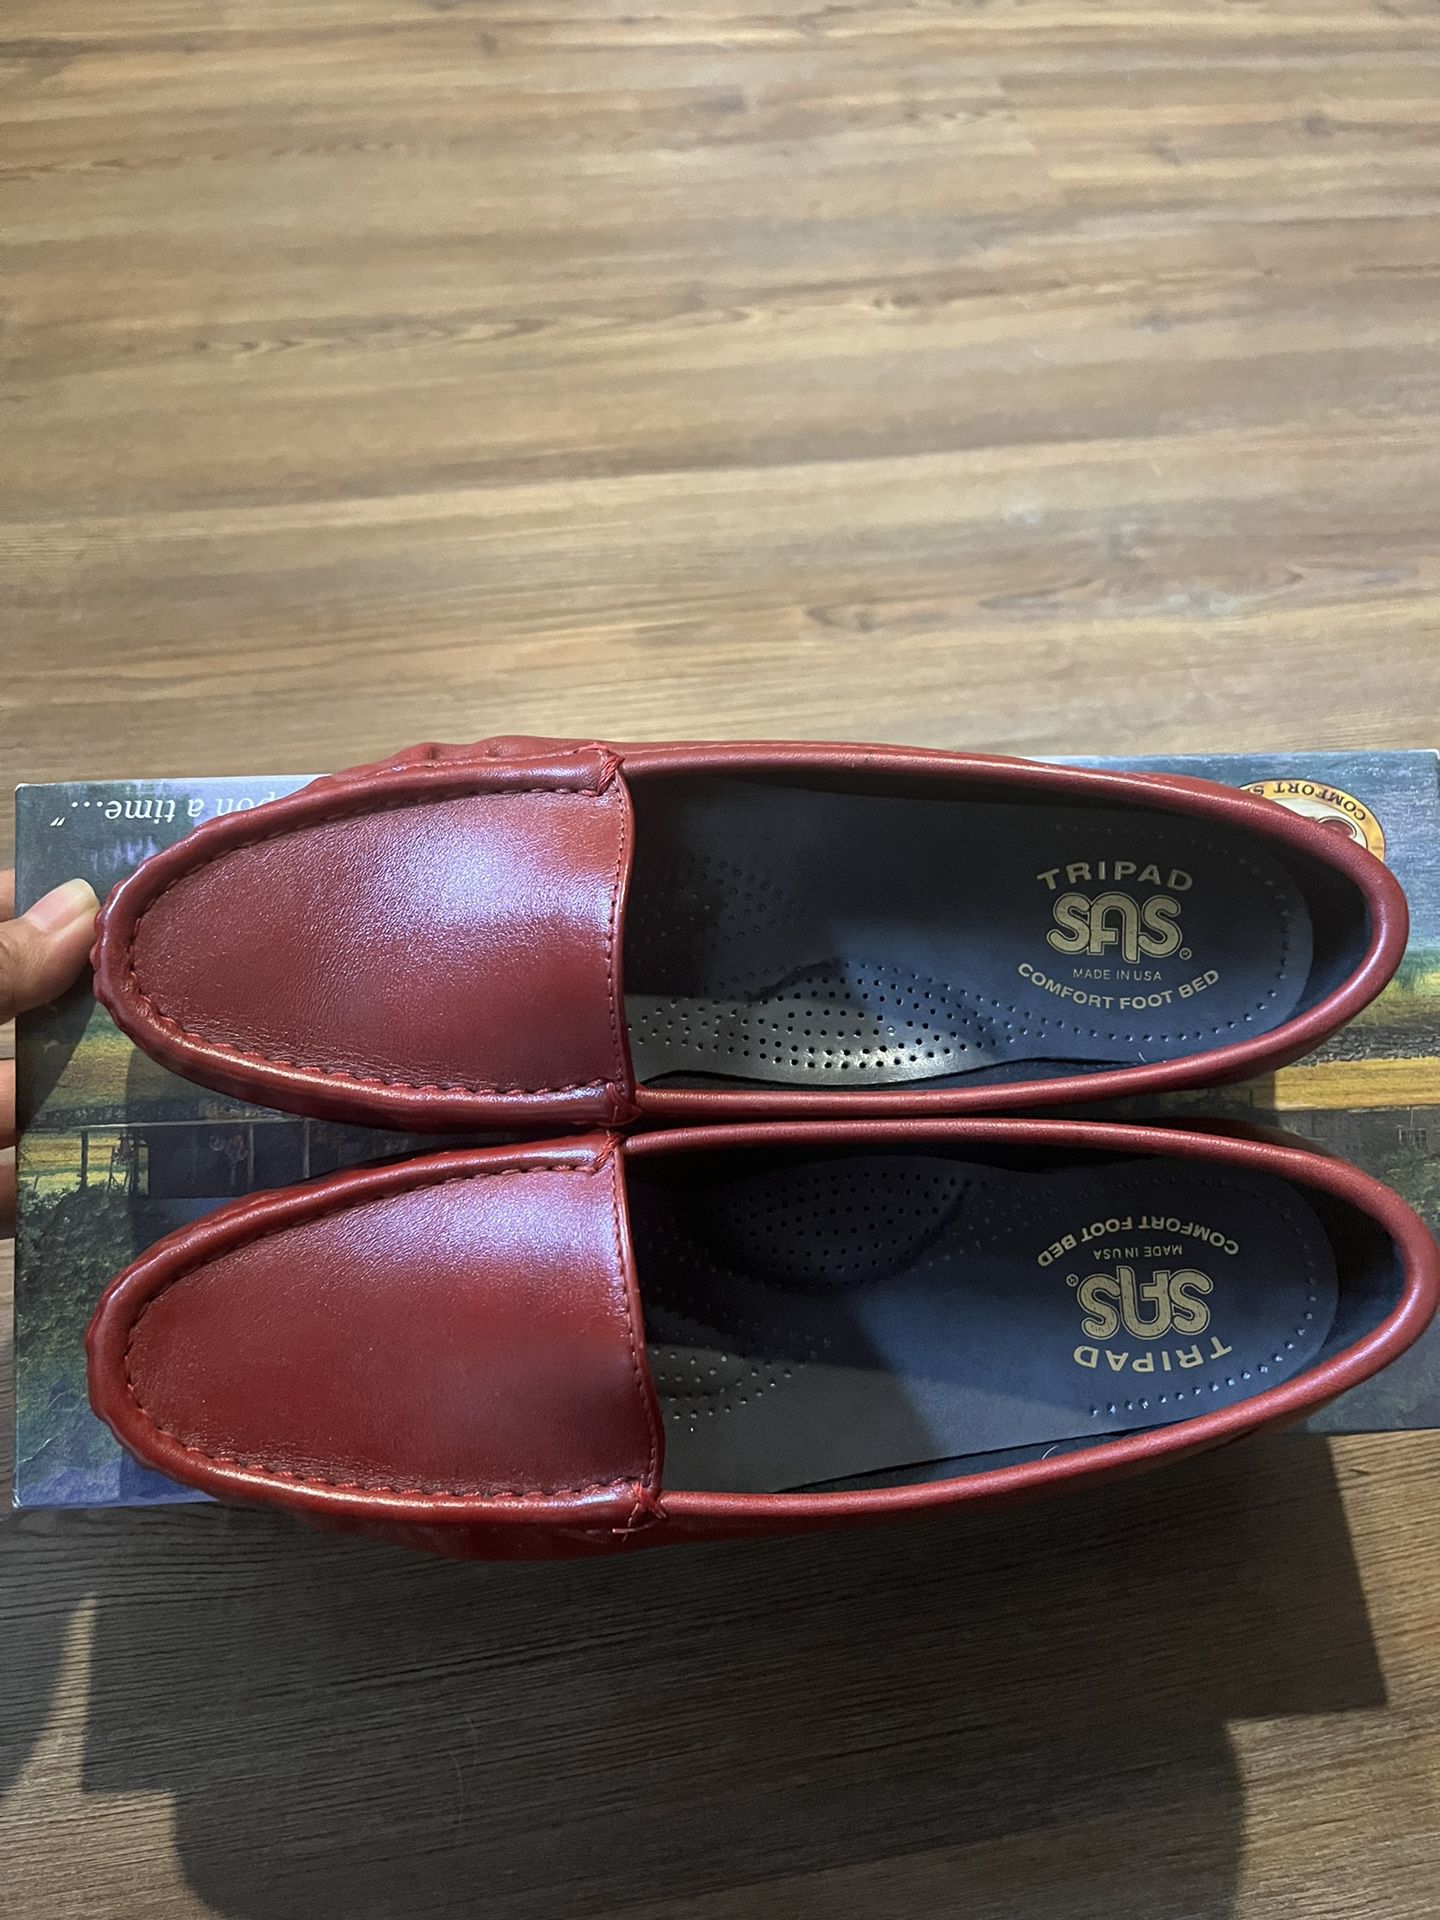 SAS Loafers Size 7.5